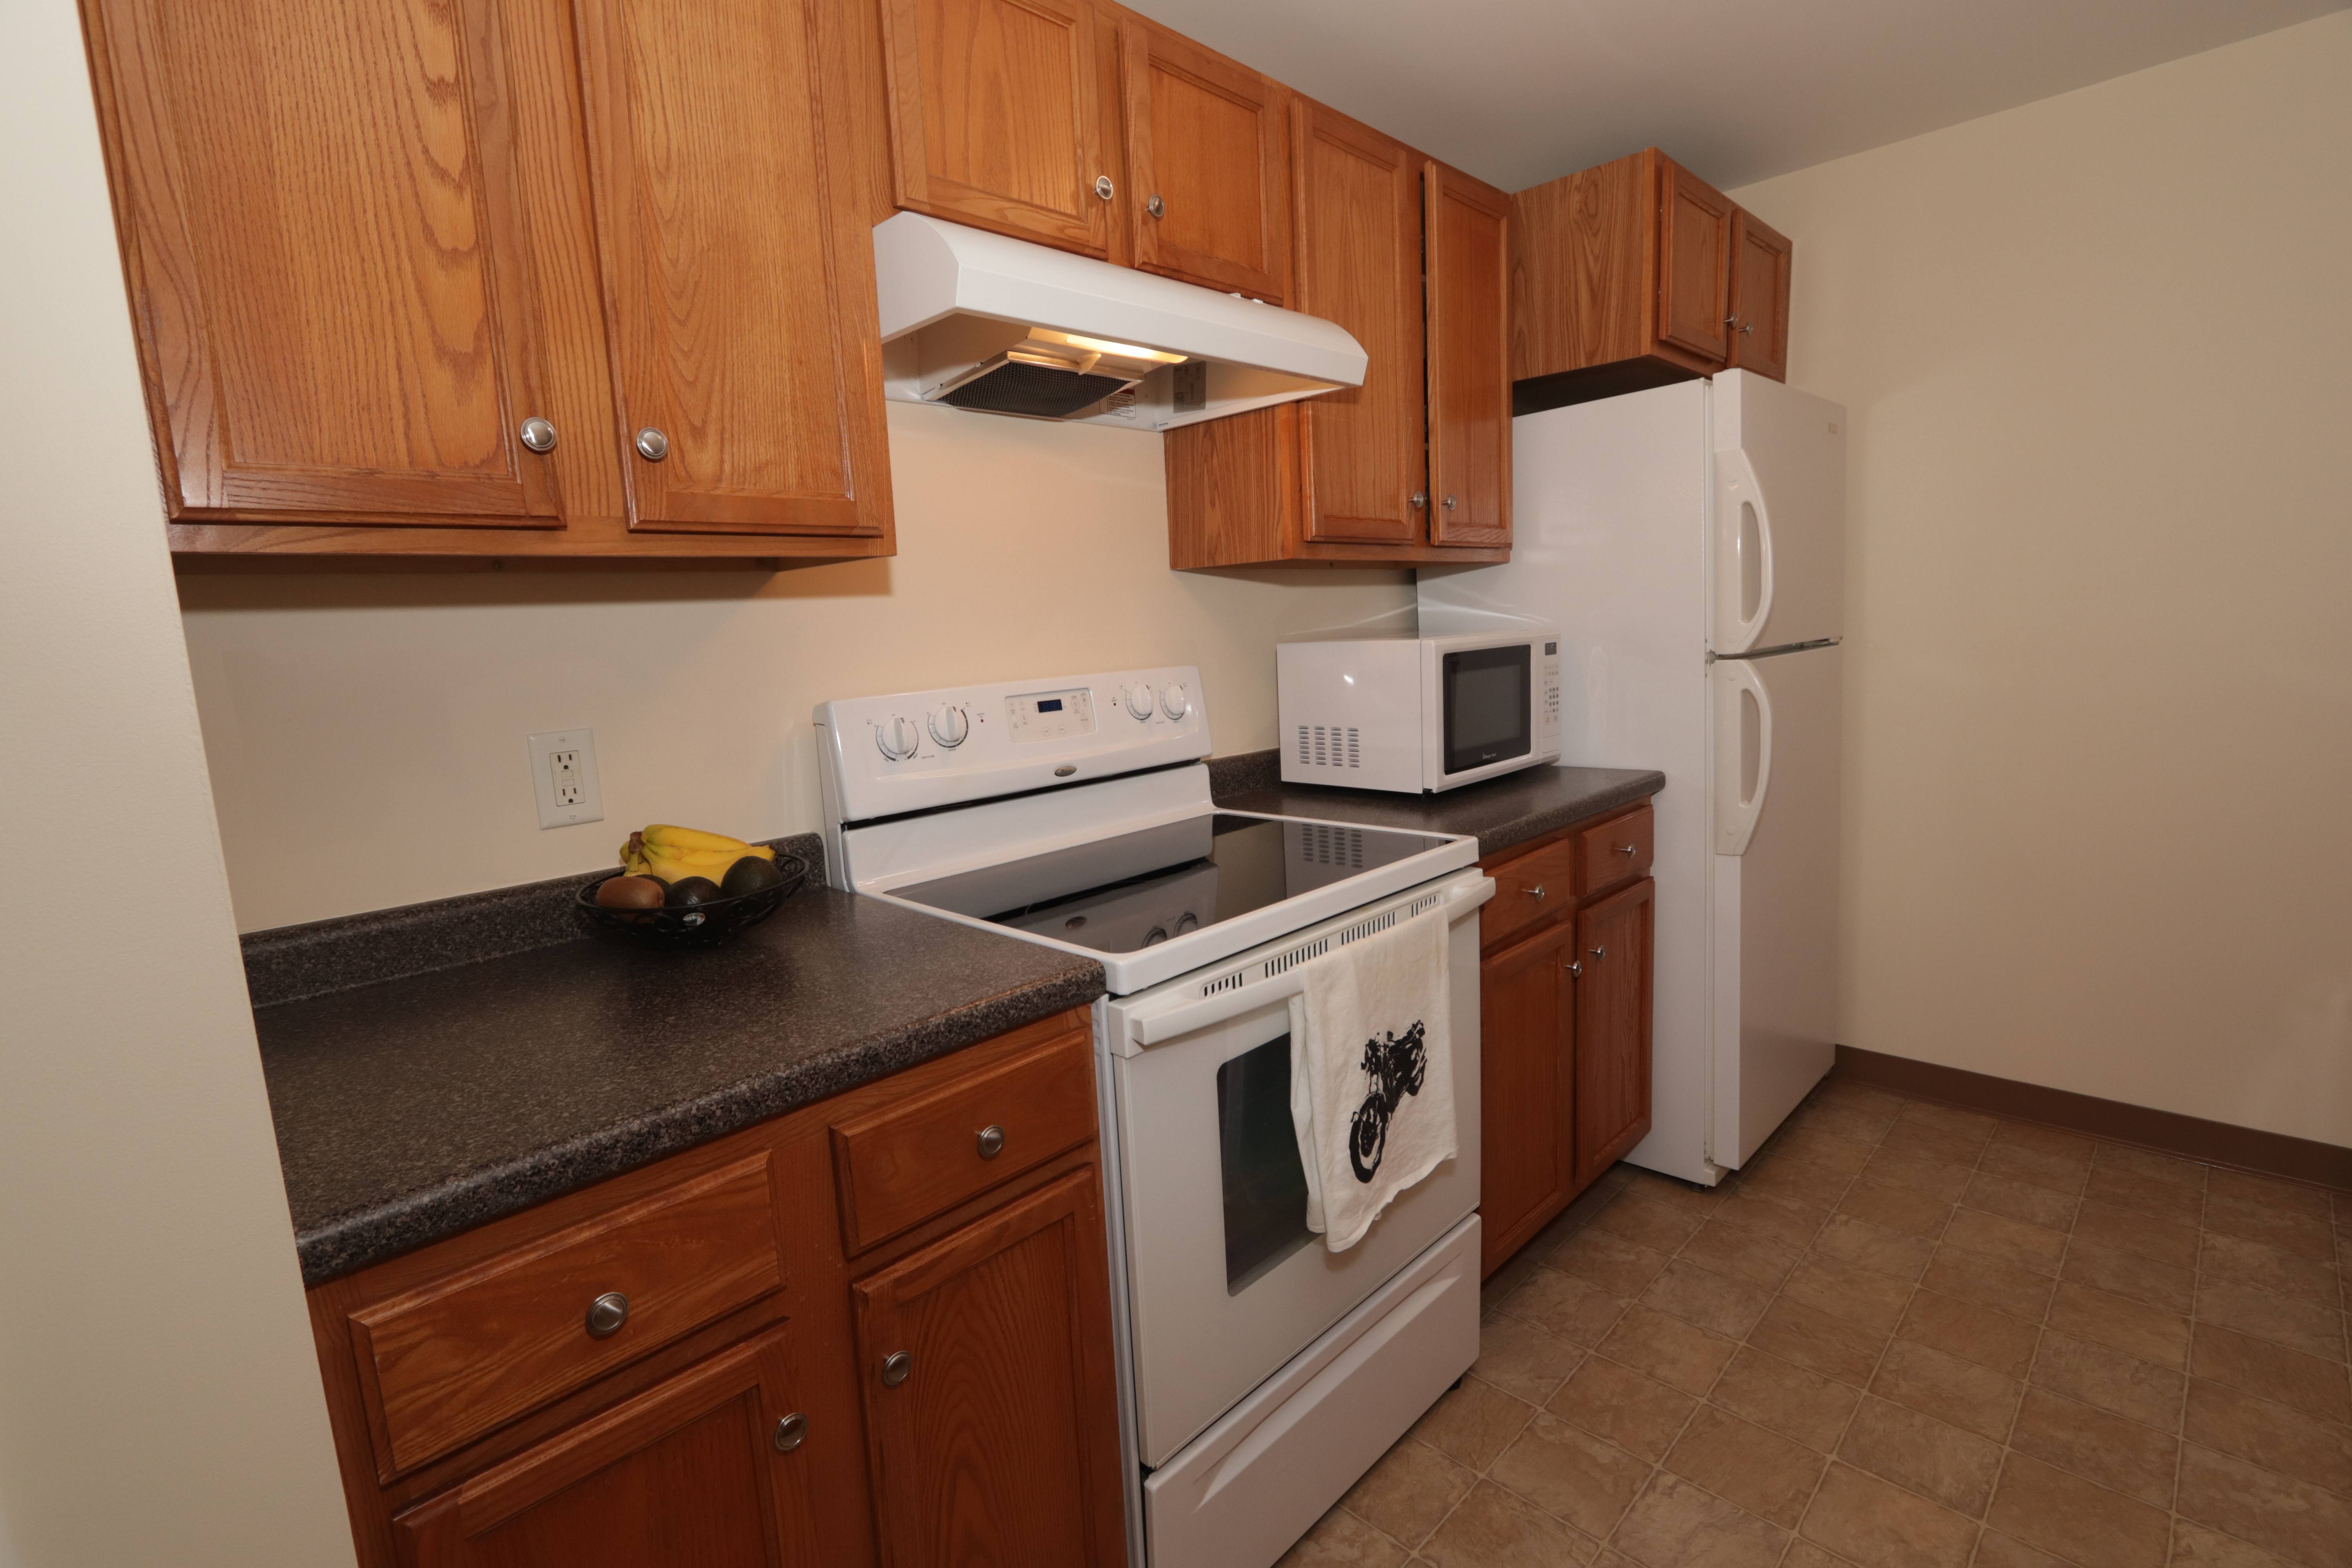 Milford condo for sale at Quarrywood Green 59 Ponemah Hill Rd Apt 2-LL2 Milford NH 03055 kitchen